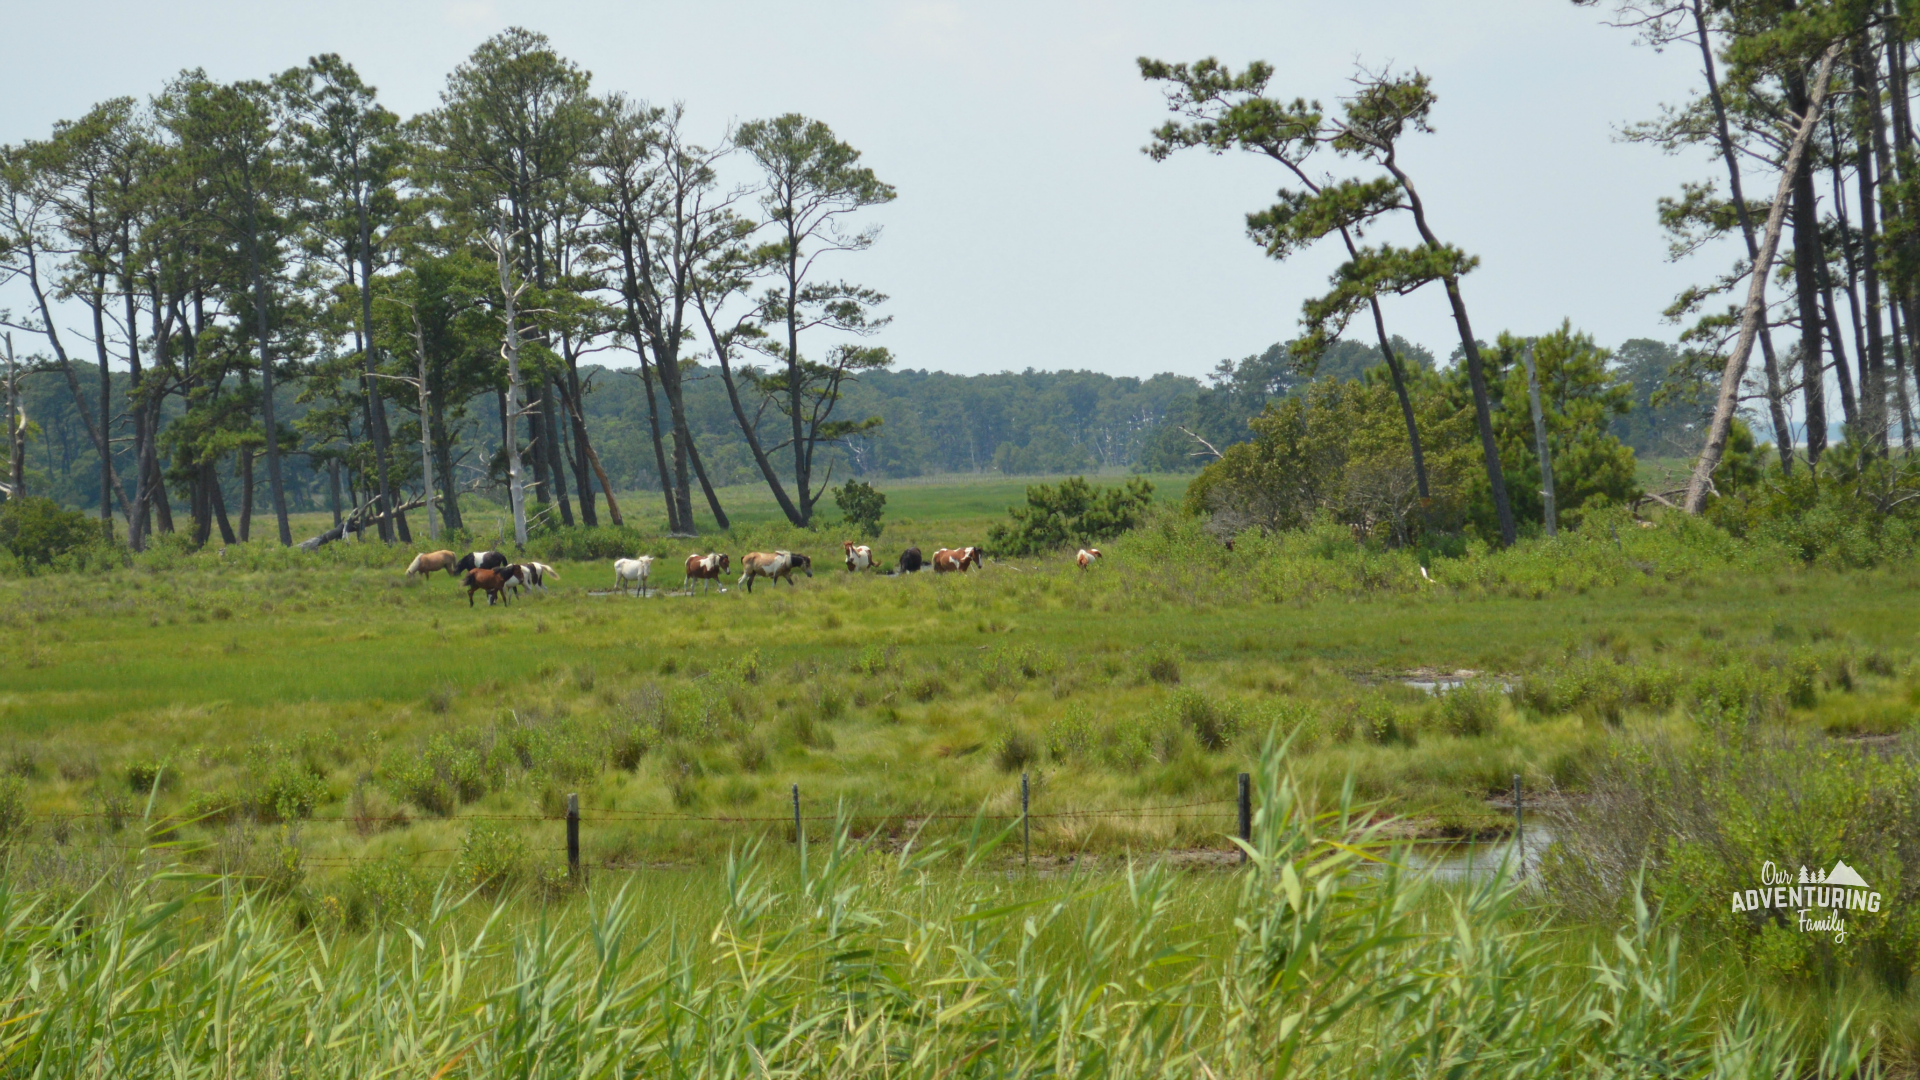 Looking for fun and free (or nearly free) things to do in Assateague and Chincoteague? We found several activities the whole family will enjoy on our recent trip to the Eastern Shore. Read more at ouradventuringfamily.com.